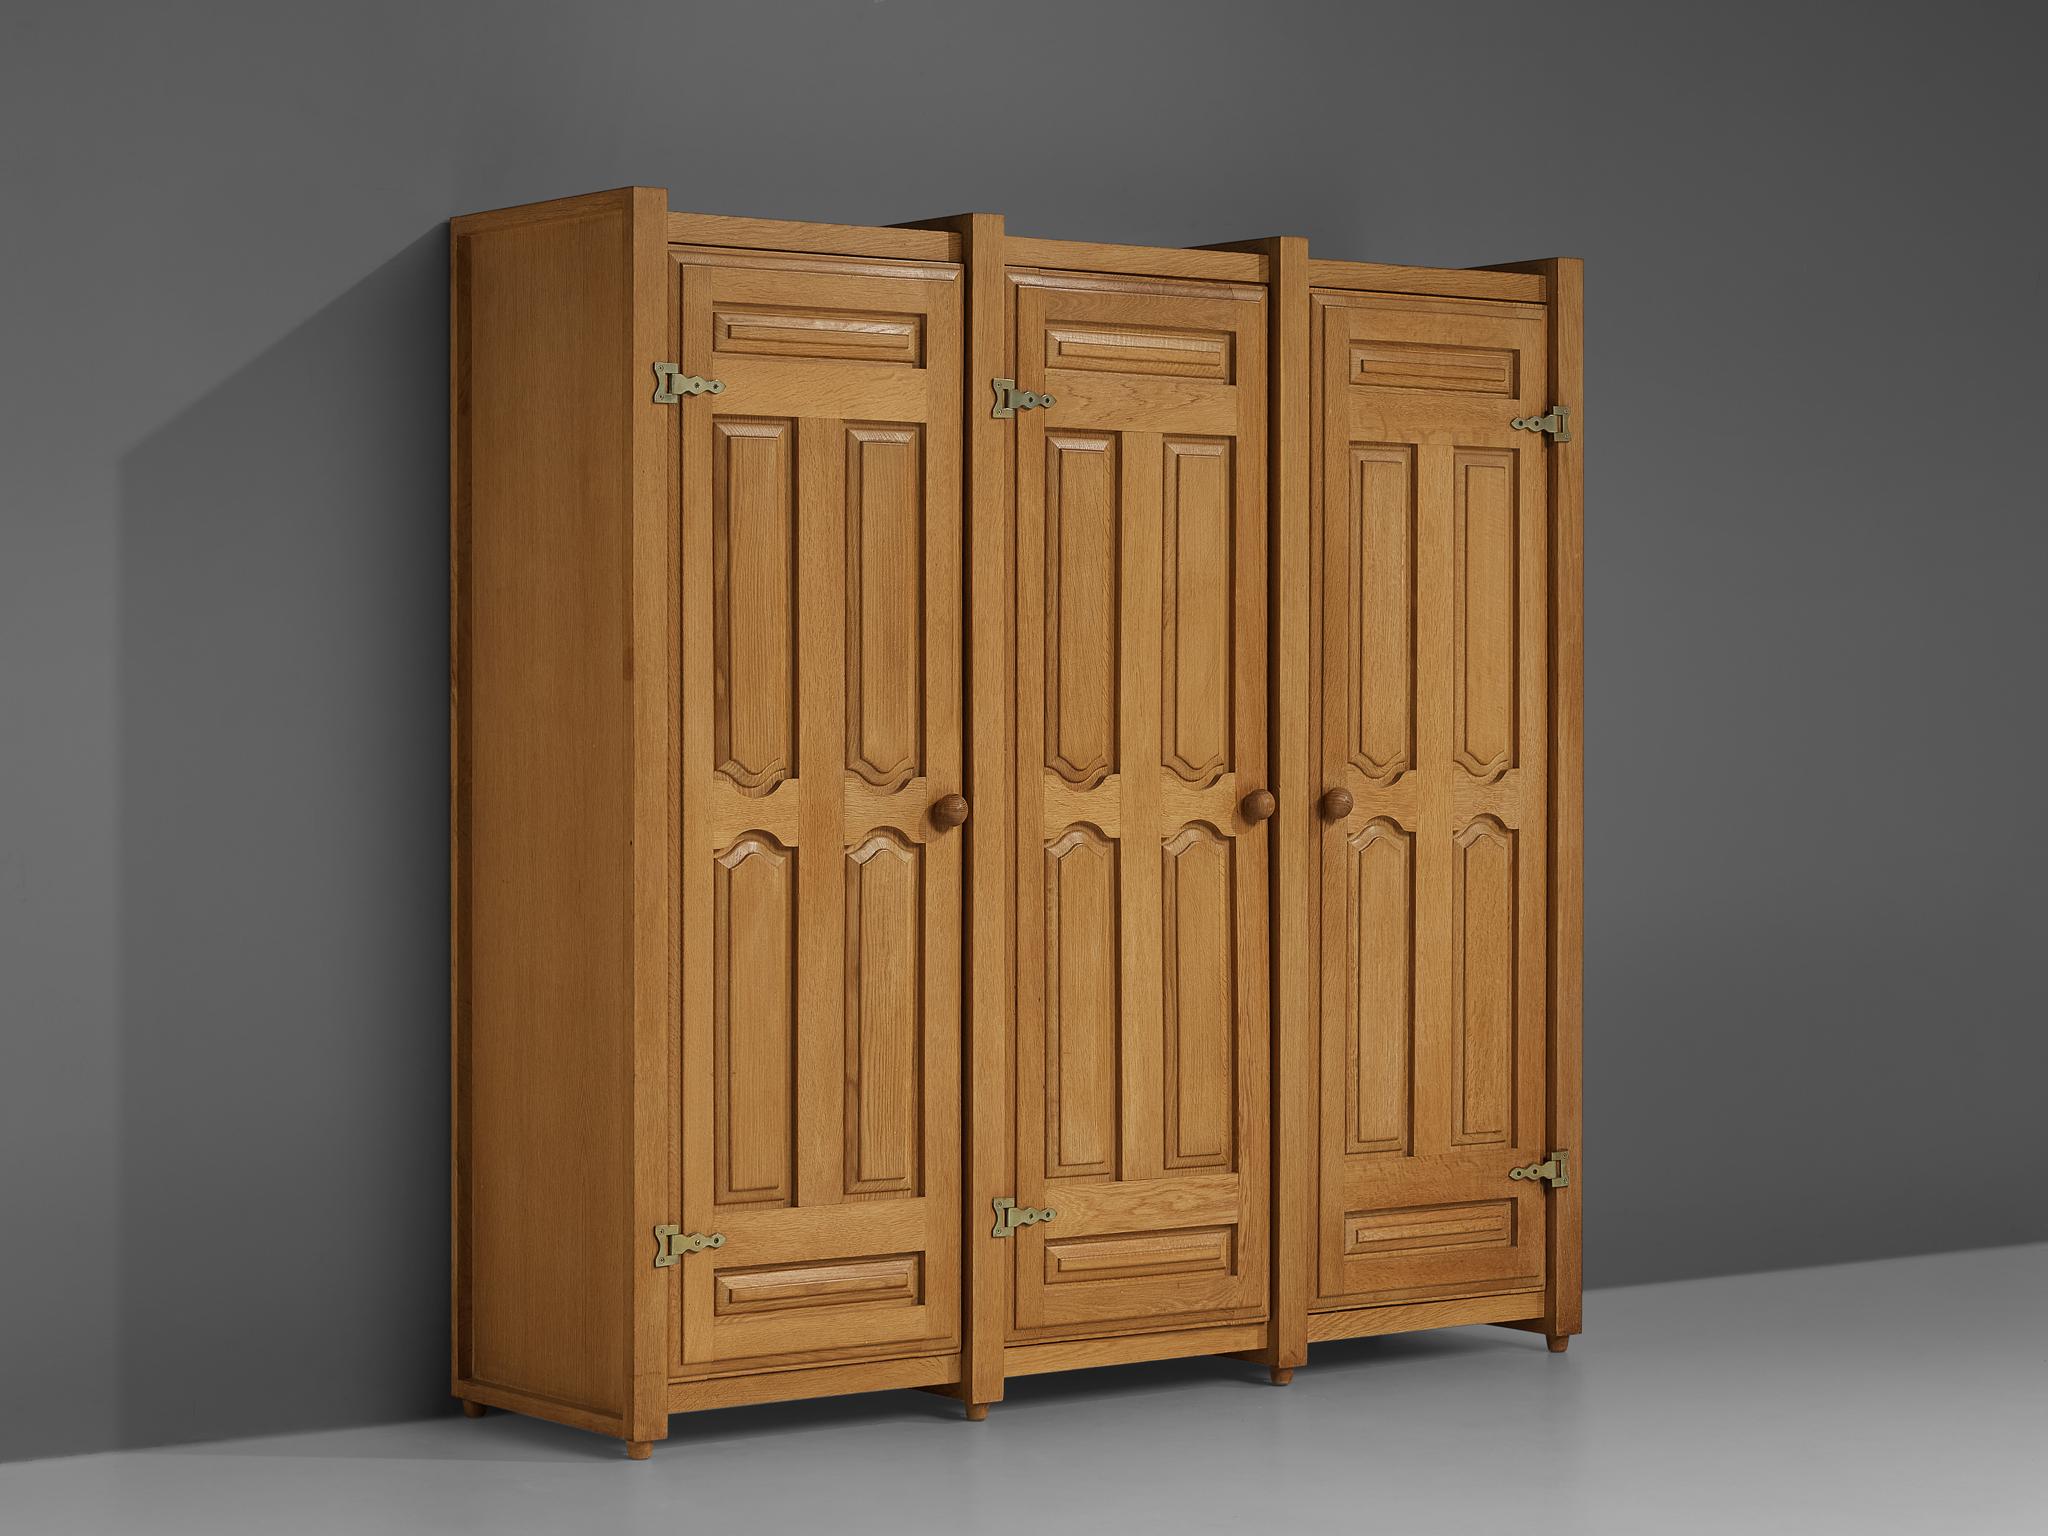 Guillerme et Chambron for Votre Maison, armoire, oak, brass, France, 1960s.

This wardrobe is designed by Guillerme and Chambron and features geometric carvings in the doors which is typical for the French duo. The armoire offers plenty of storage